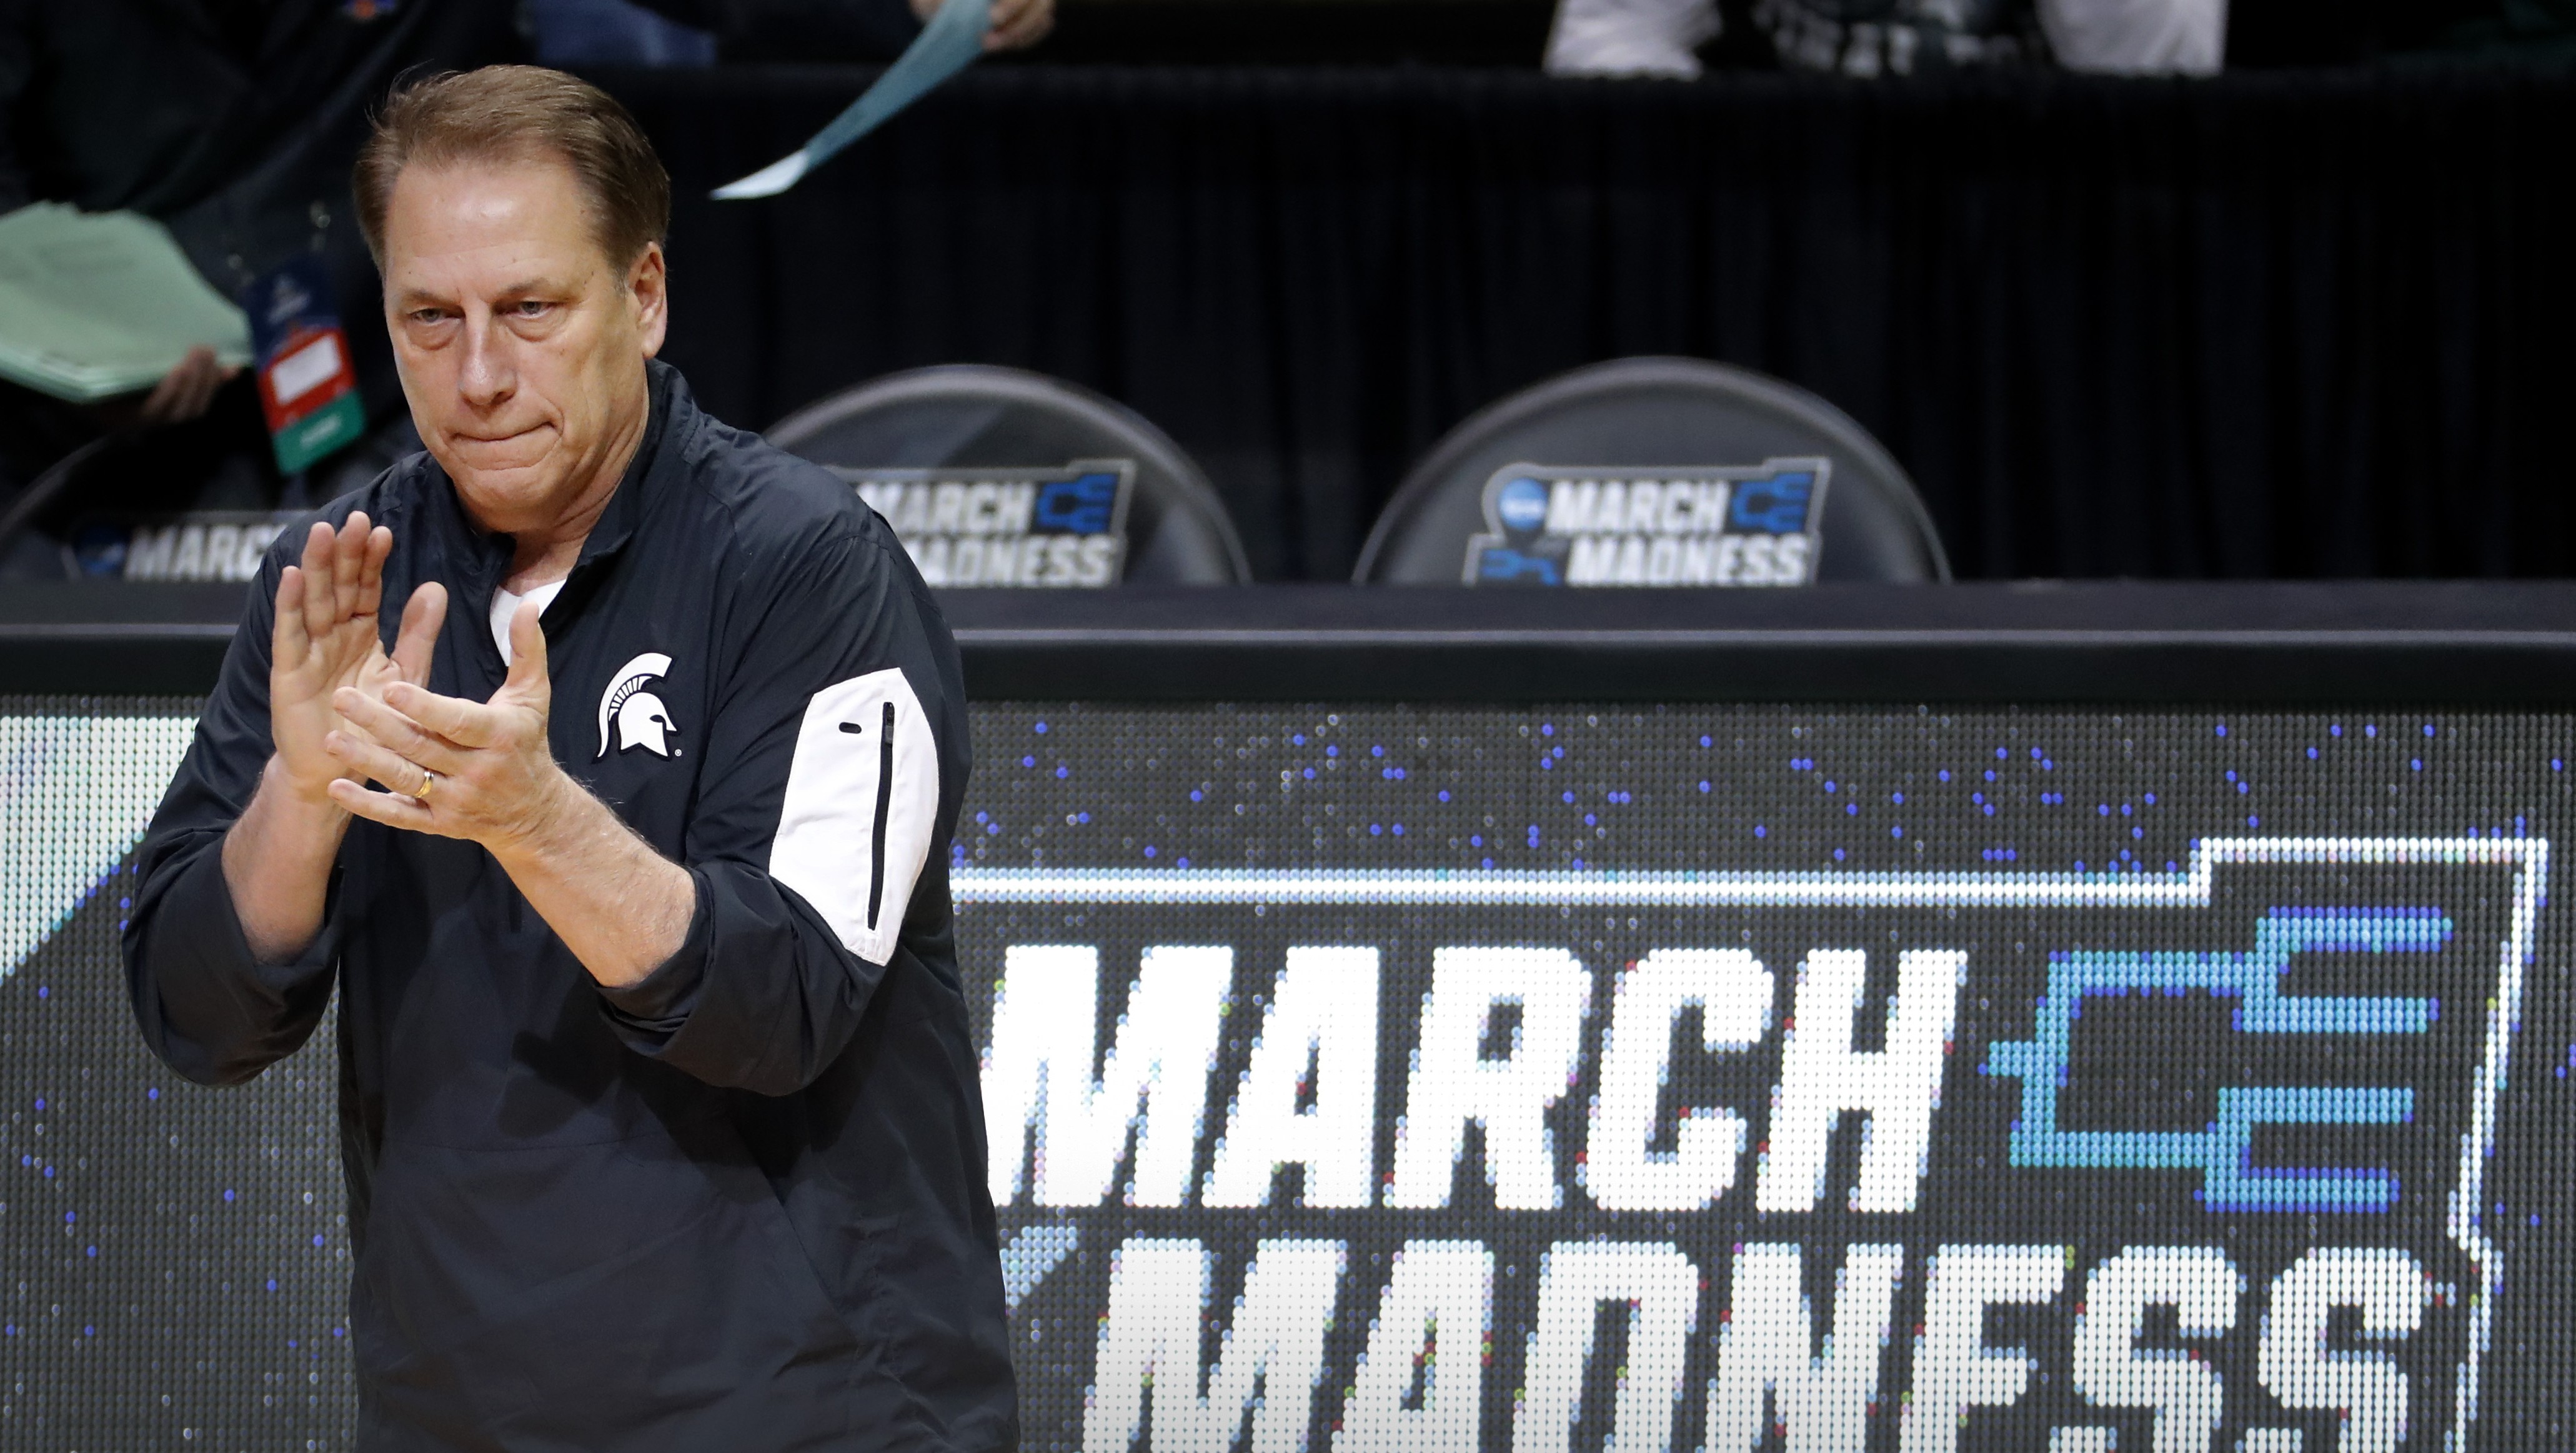 Michigan State head coach Tom Izzo watches during practice ahead of a first-round men's college basketball game in the NCAA Tournament, Thursday, March 17, 2016, in St. Louis. Michigan State plays Middle Tennessee on Friday. (AP Photo/Charlie Riedel)